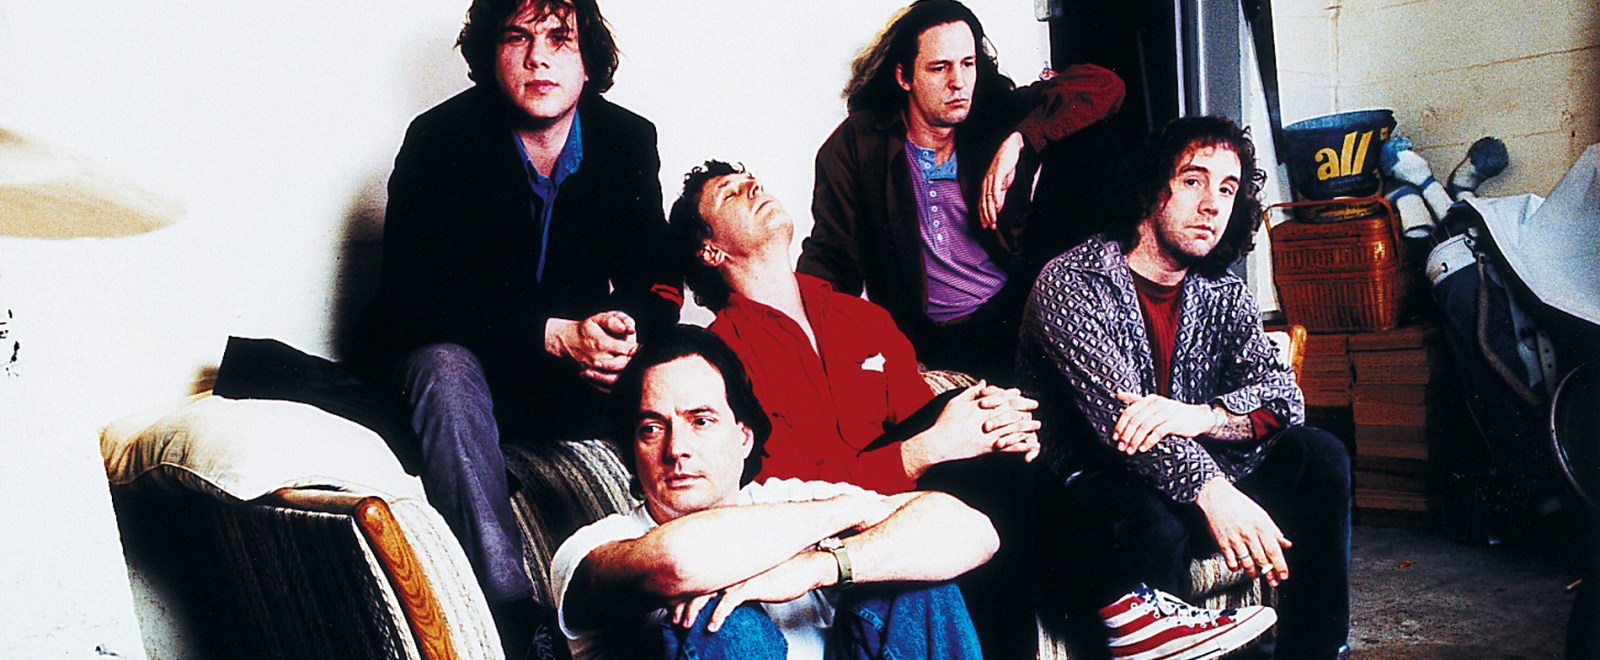 Guided by Voices – Overloaded Lyrics